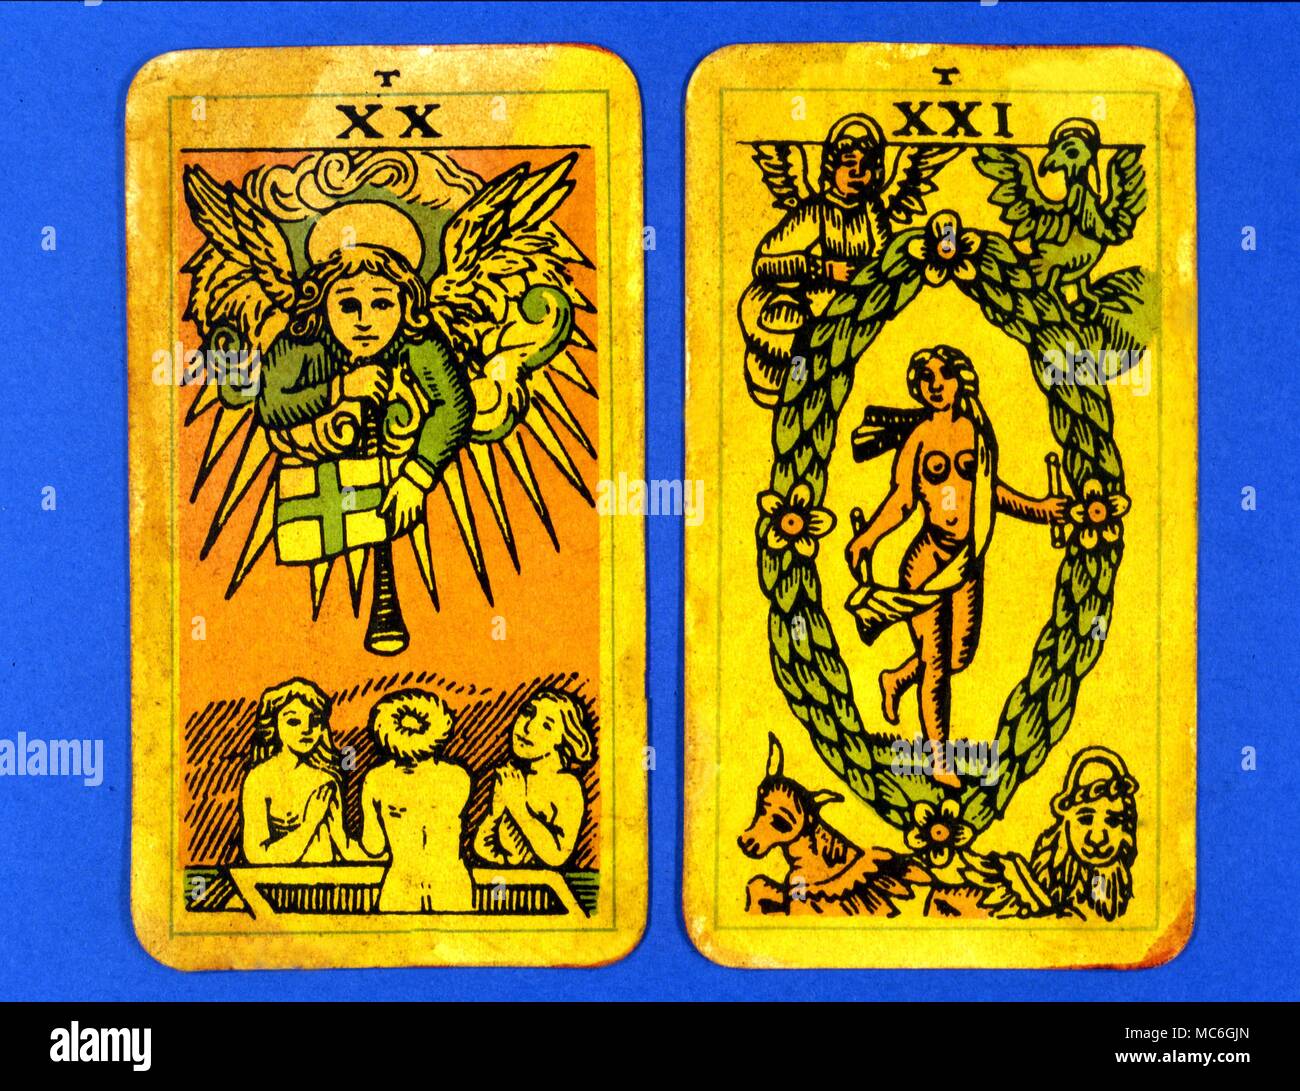 Tarot Cards-Majo Arcana- The Parisian Tarot. Card 20. The Judgement, and Card 21. The World. Two cards from a Major Arcana picture Tarot,adapted by a Wiccan group. Probably designed in an archaizing style in loose imitation of the Rosicrucian deck designed by Pamela Coleman Smith, alongside A.E.Waite, and various earlier decks, such as that published by Encausse (Papus) in The Tarot of the Bohemians at the end of the 19th century, post 1905, but earlier than 1912. The name Parisian Tarot was given by the owner of the deck - it might however be called the Tau Tarot, from the intriguing letter Stock Photo